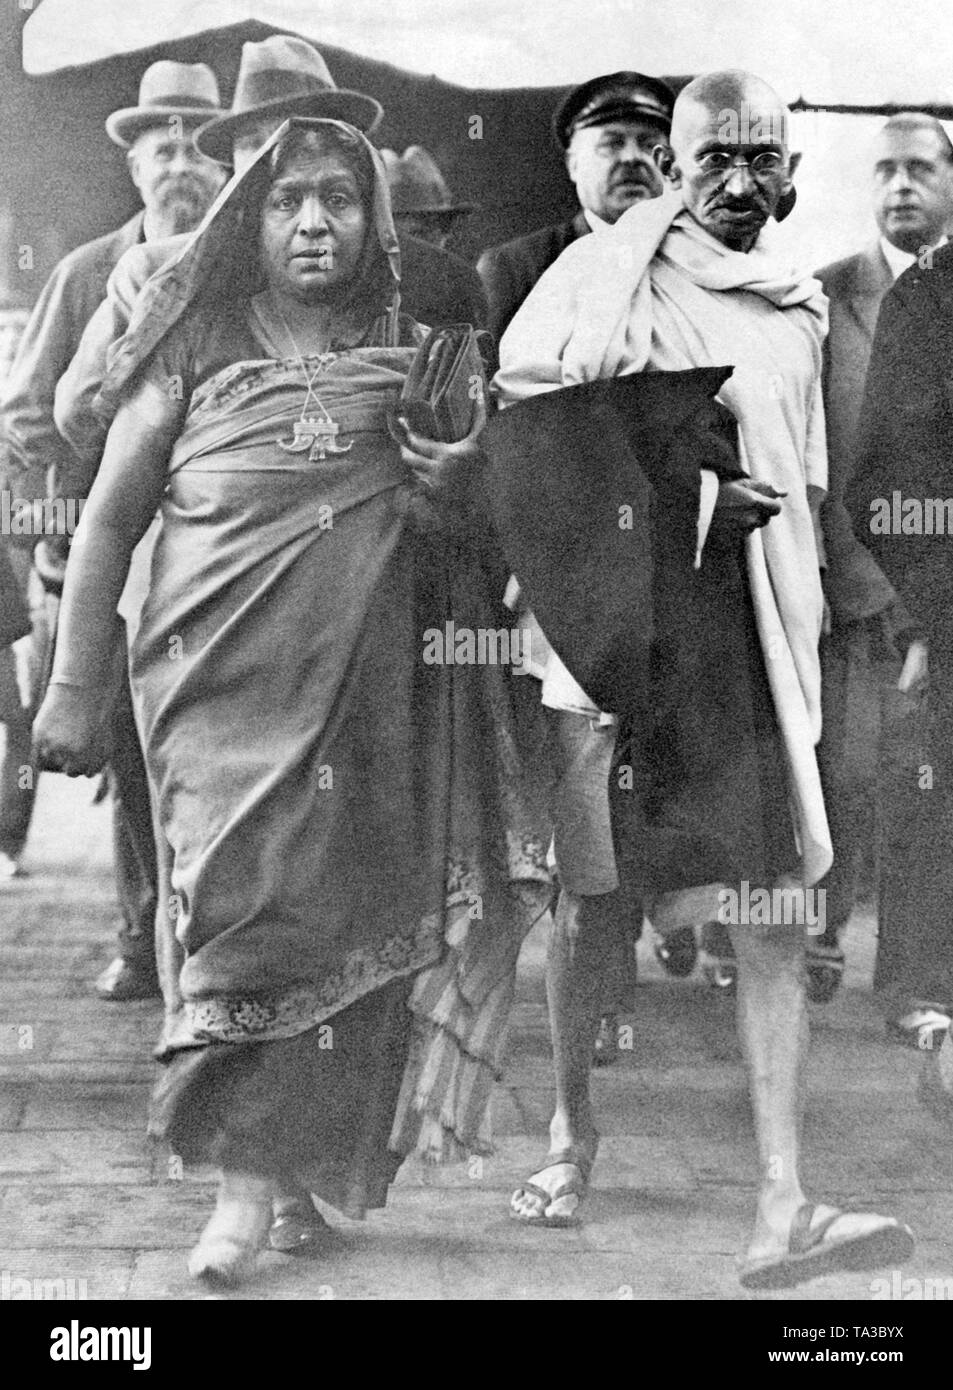 The leader of the Indian nationalist, Mahatma Gandhi, and the Indian poetess and politician Sarojini Naidu. They are on the way to the Indian Round Table Conference. Stock Photo